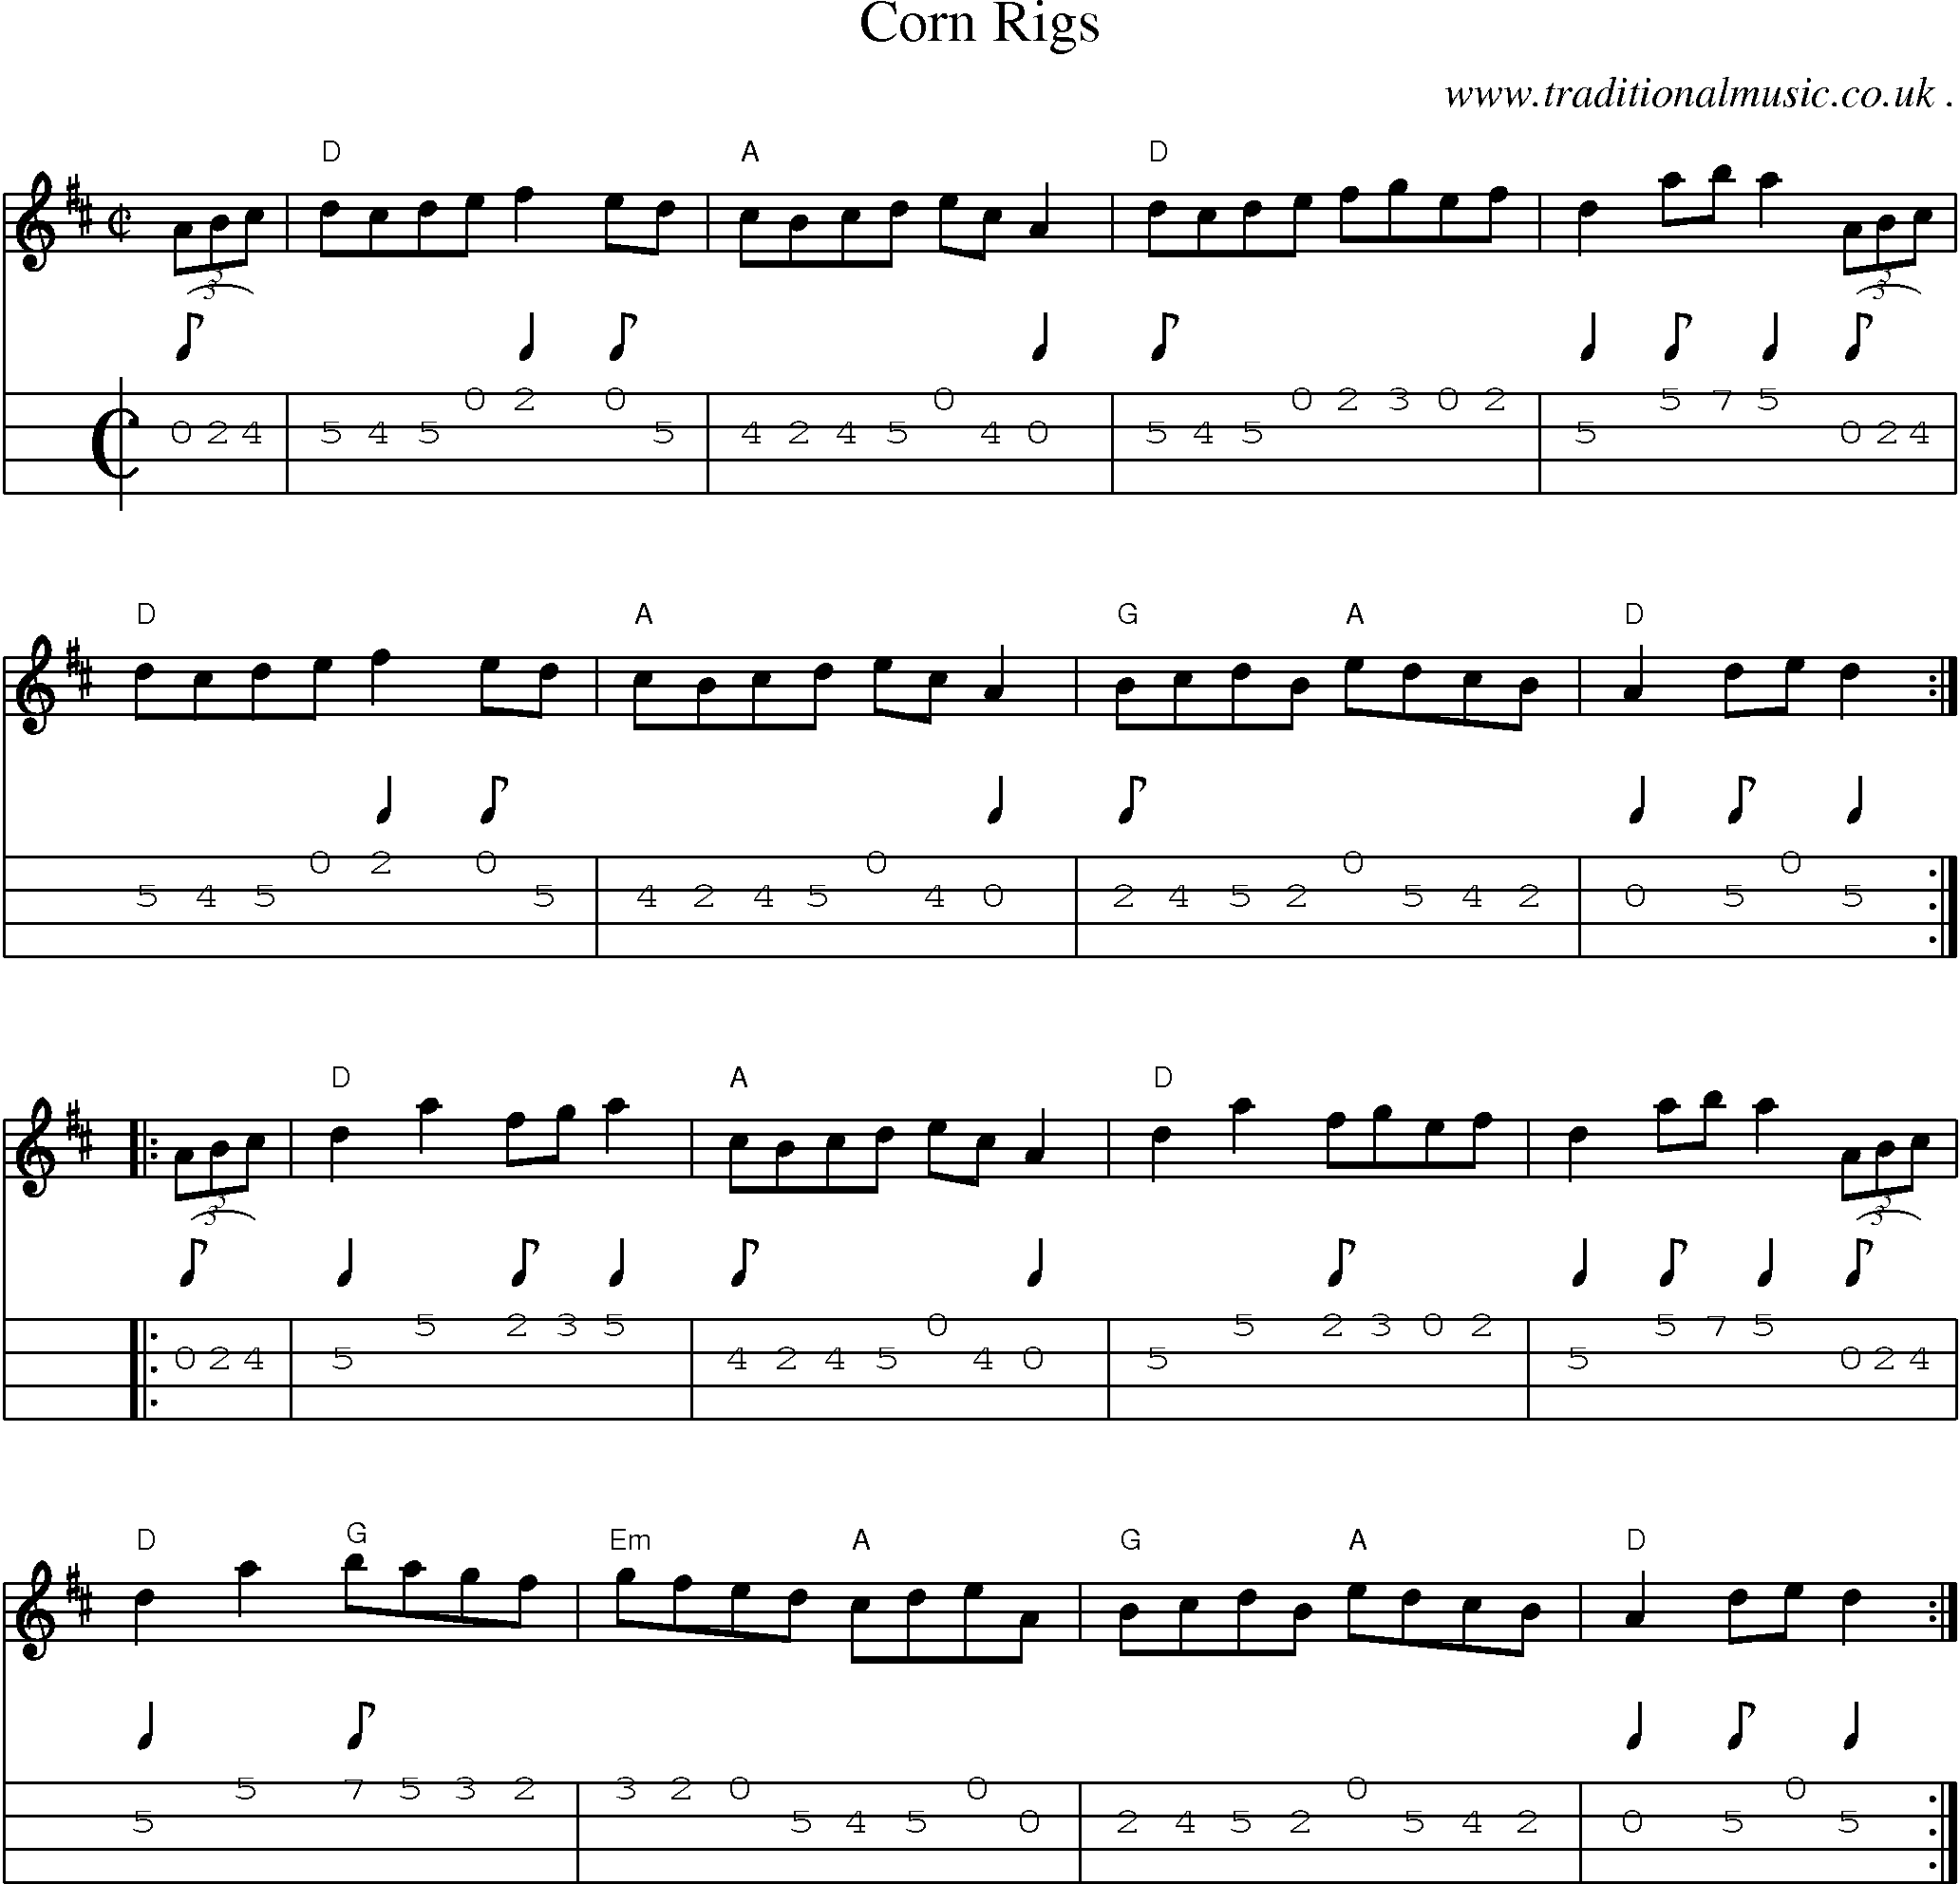 Music Score and Guitar Tabs for Corn Rigs